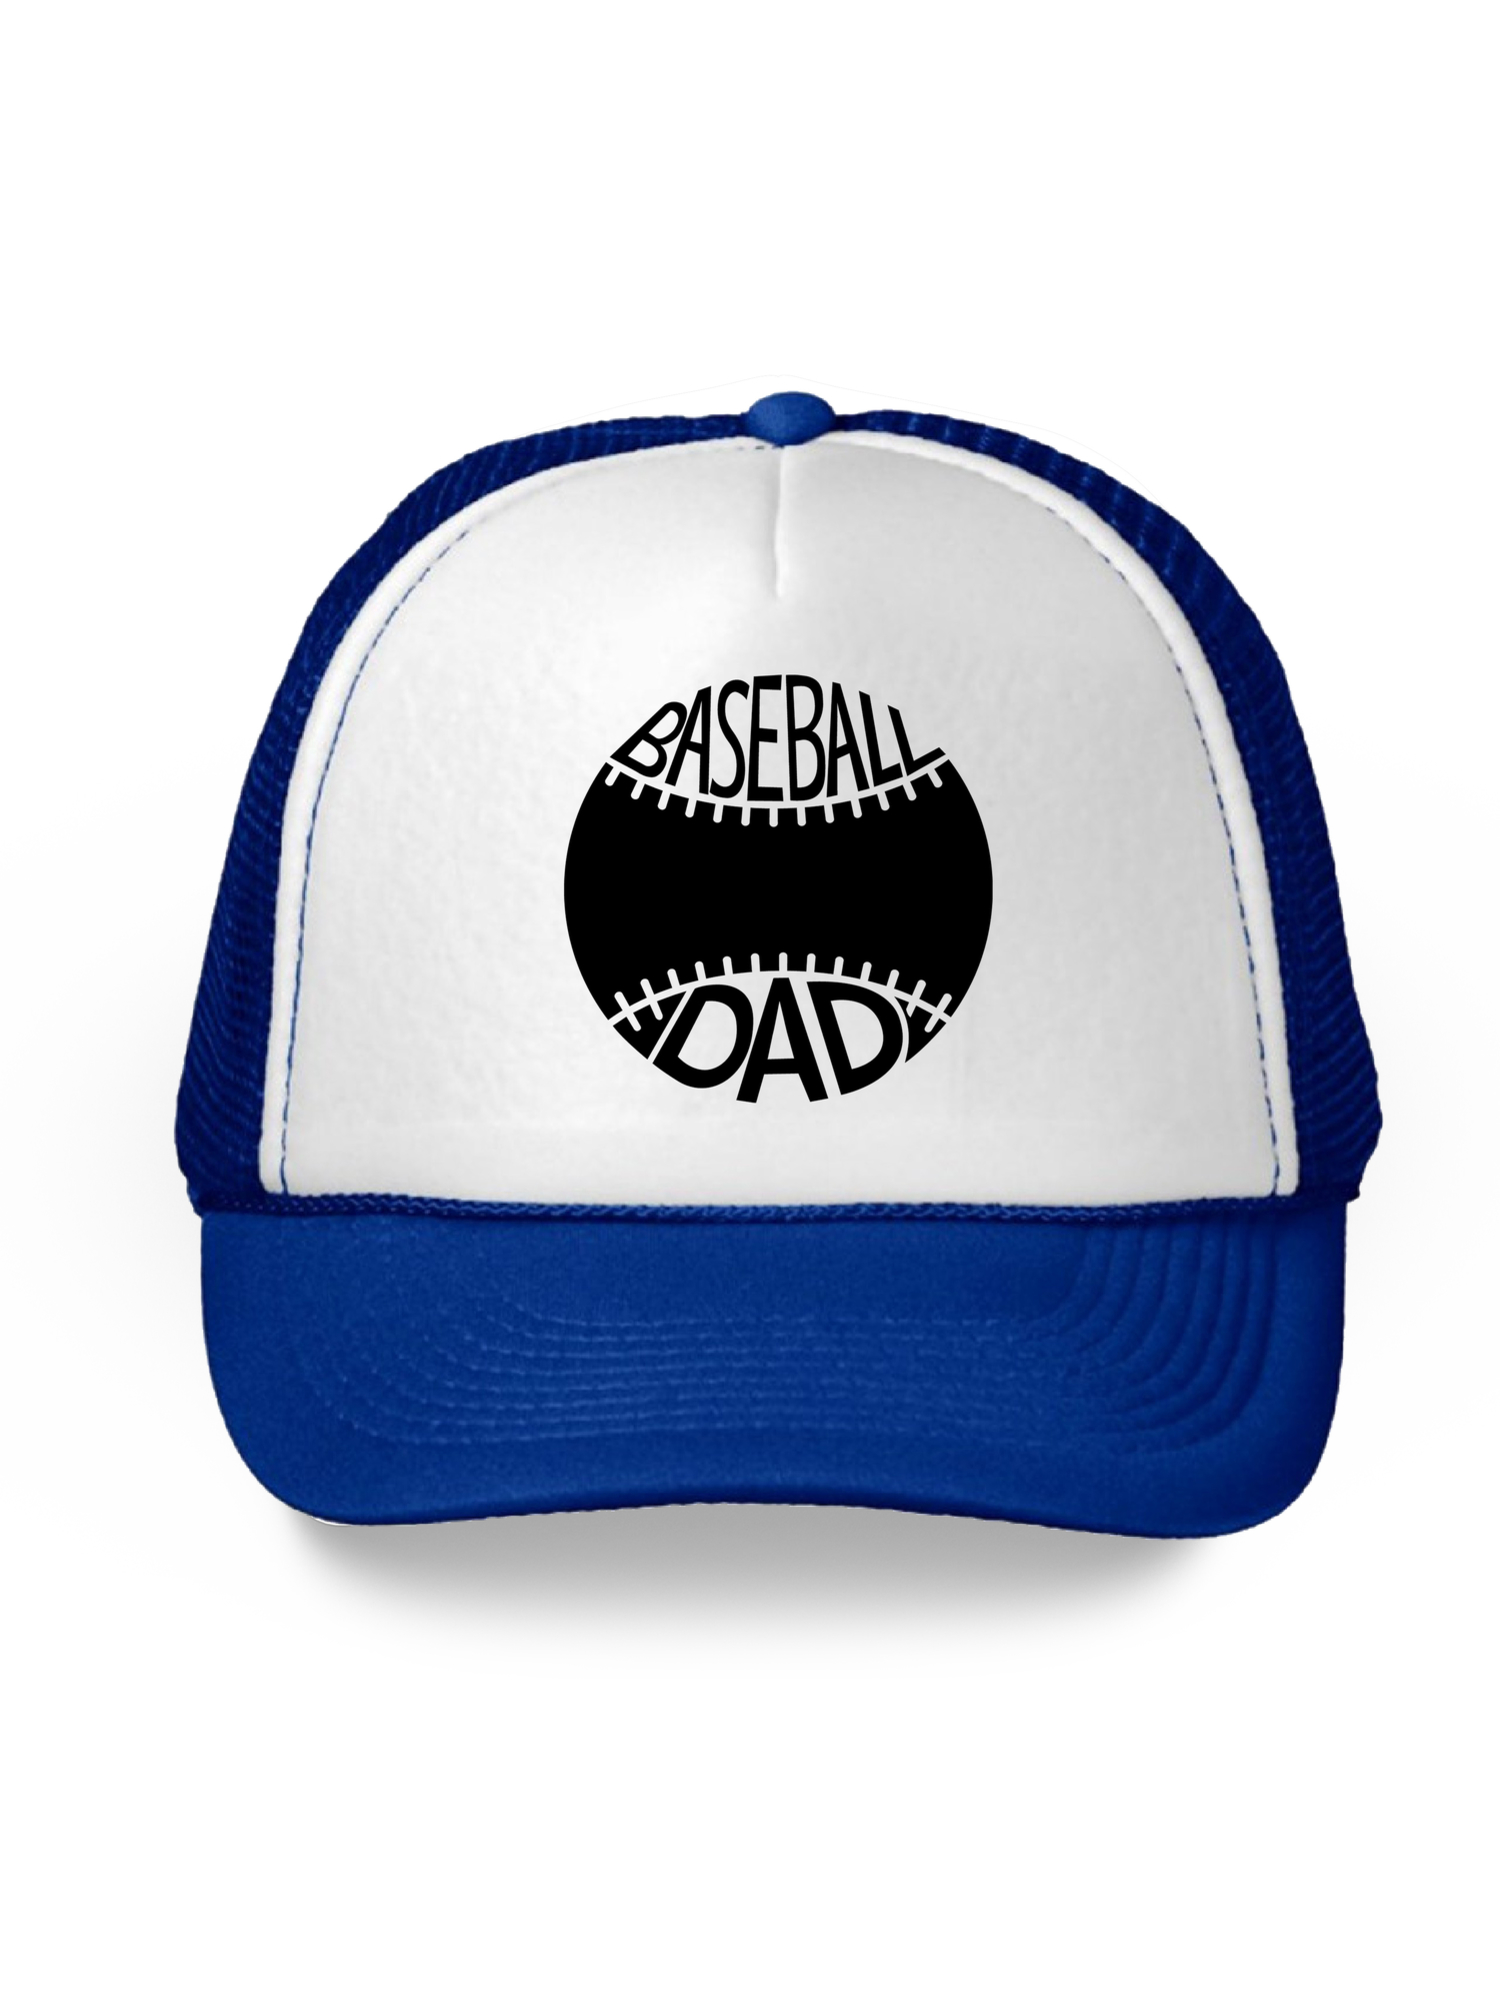 Awkward Styles Gifts for Dad Baseball Dad Trucker Hat Baseball Hat for Dad Baseball Gifts Father's Day Trucker Hats Sports Dad Snapback Hat Baseball Fans Cheer Dad Trucker Hat Cool Sports Gifts - image 1 of 6